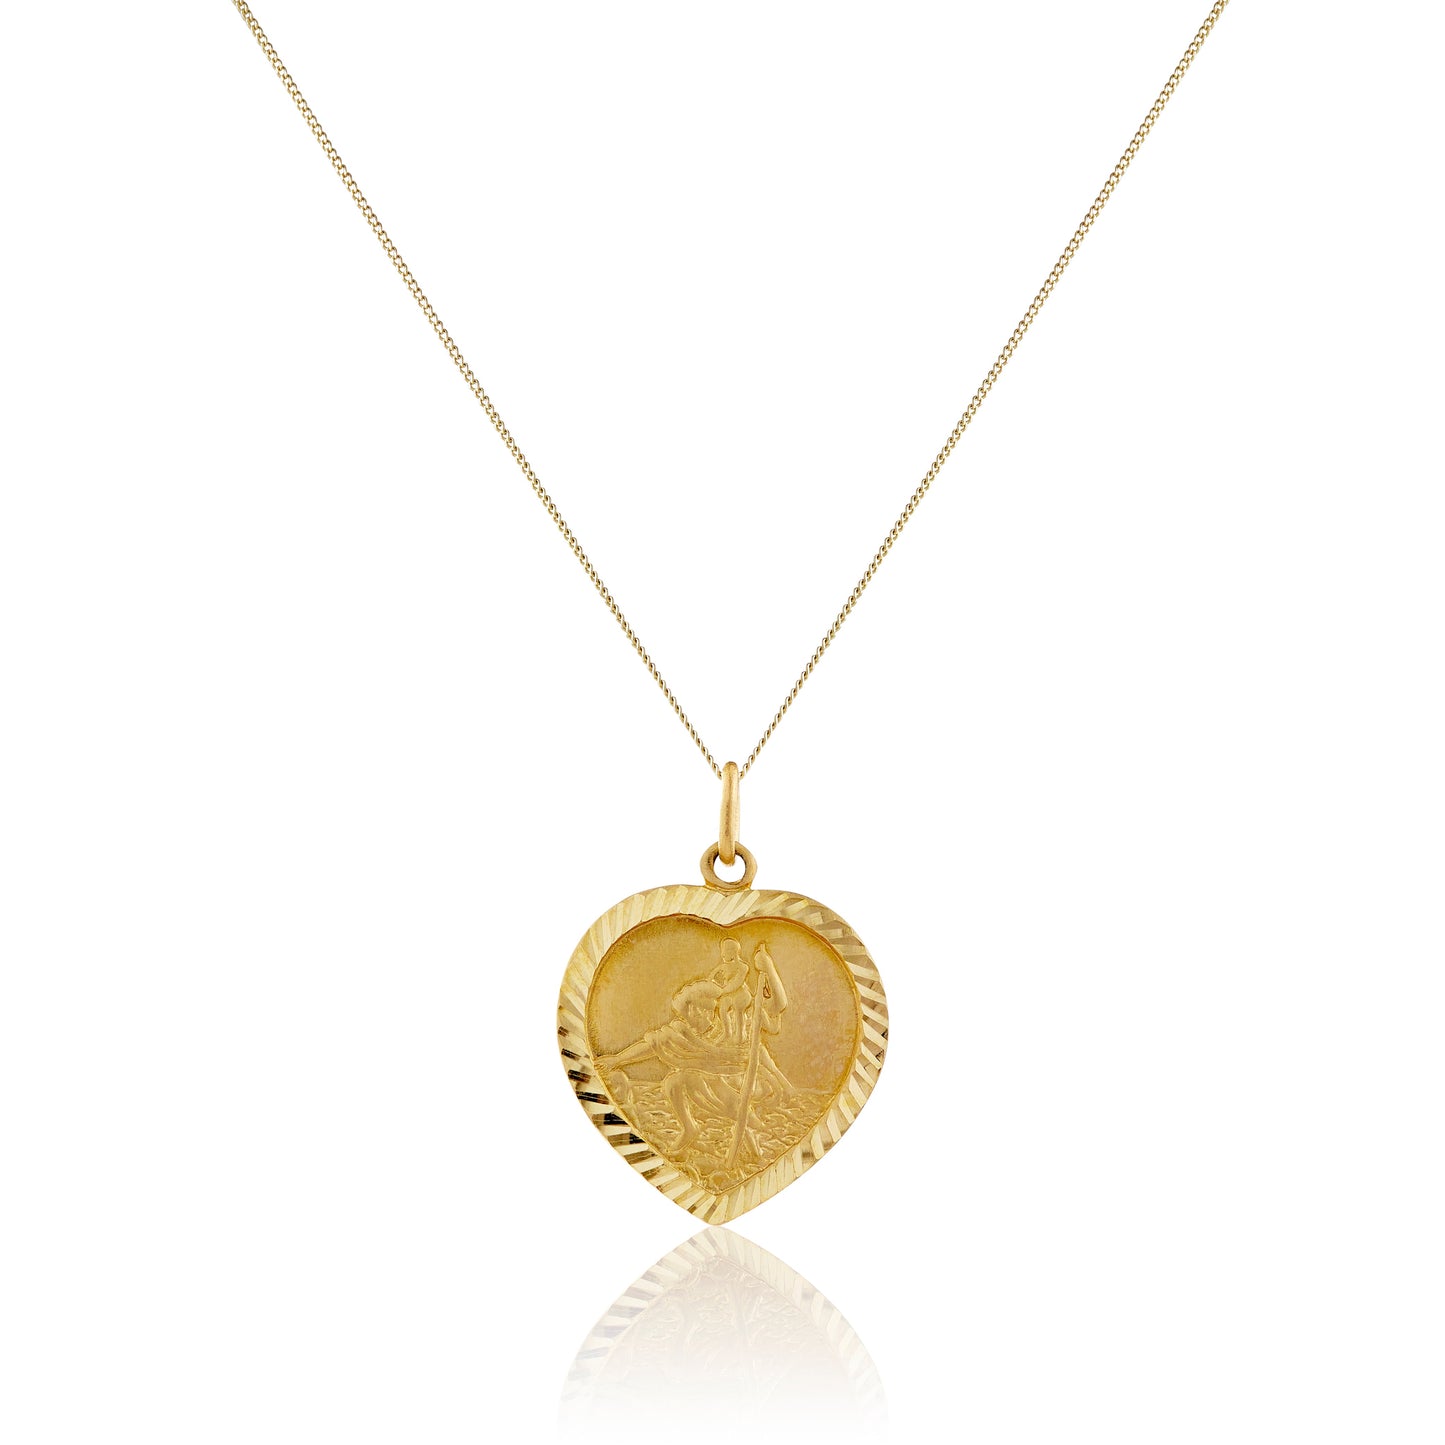 Personalised 9ct Gold St Christopher Heart Necklace - 16 - 18 Inches